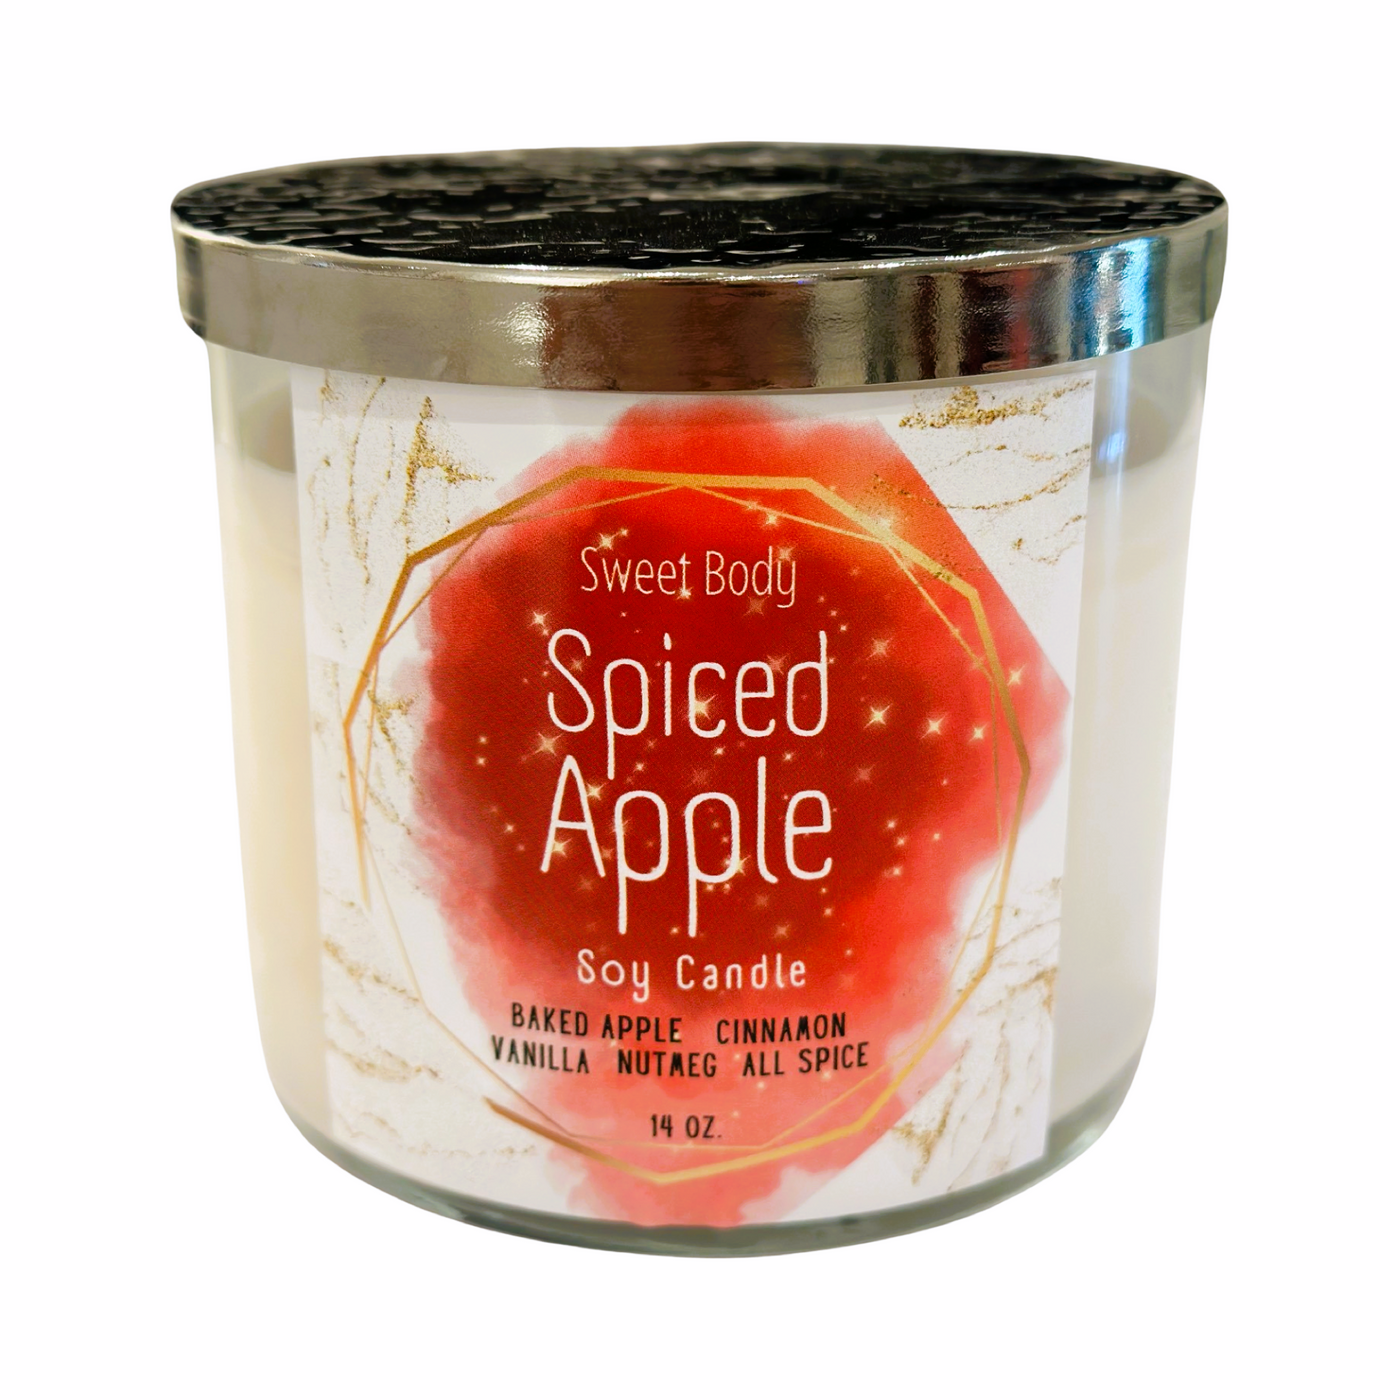 Spiced Apple 3 Wick Soy Candle 14oz